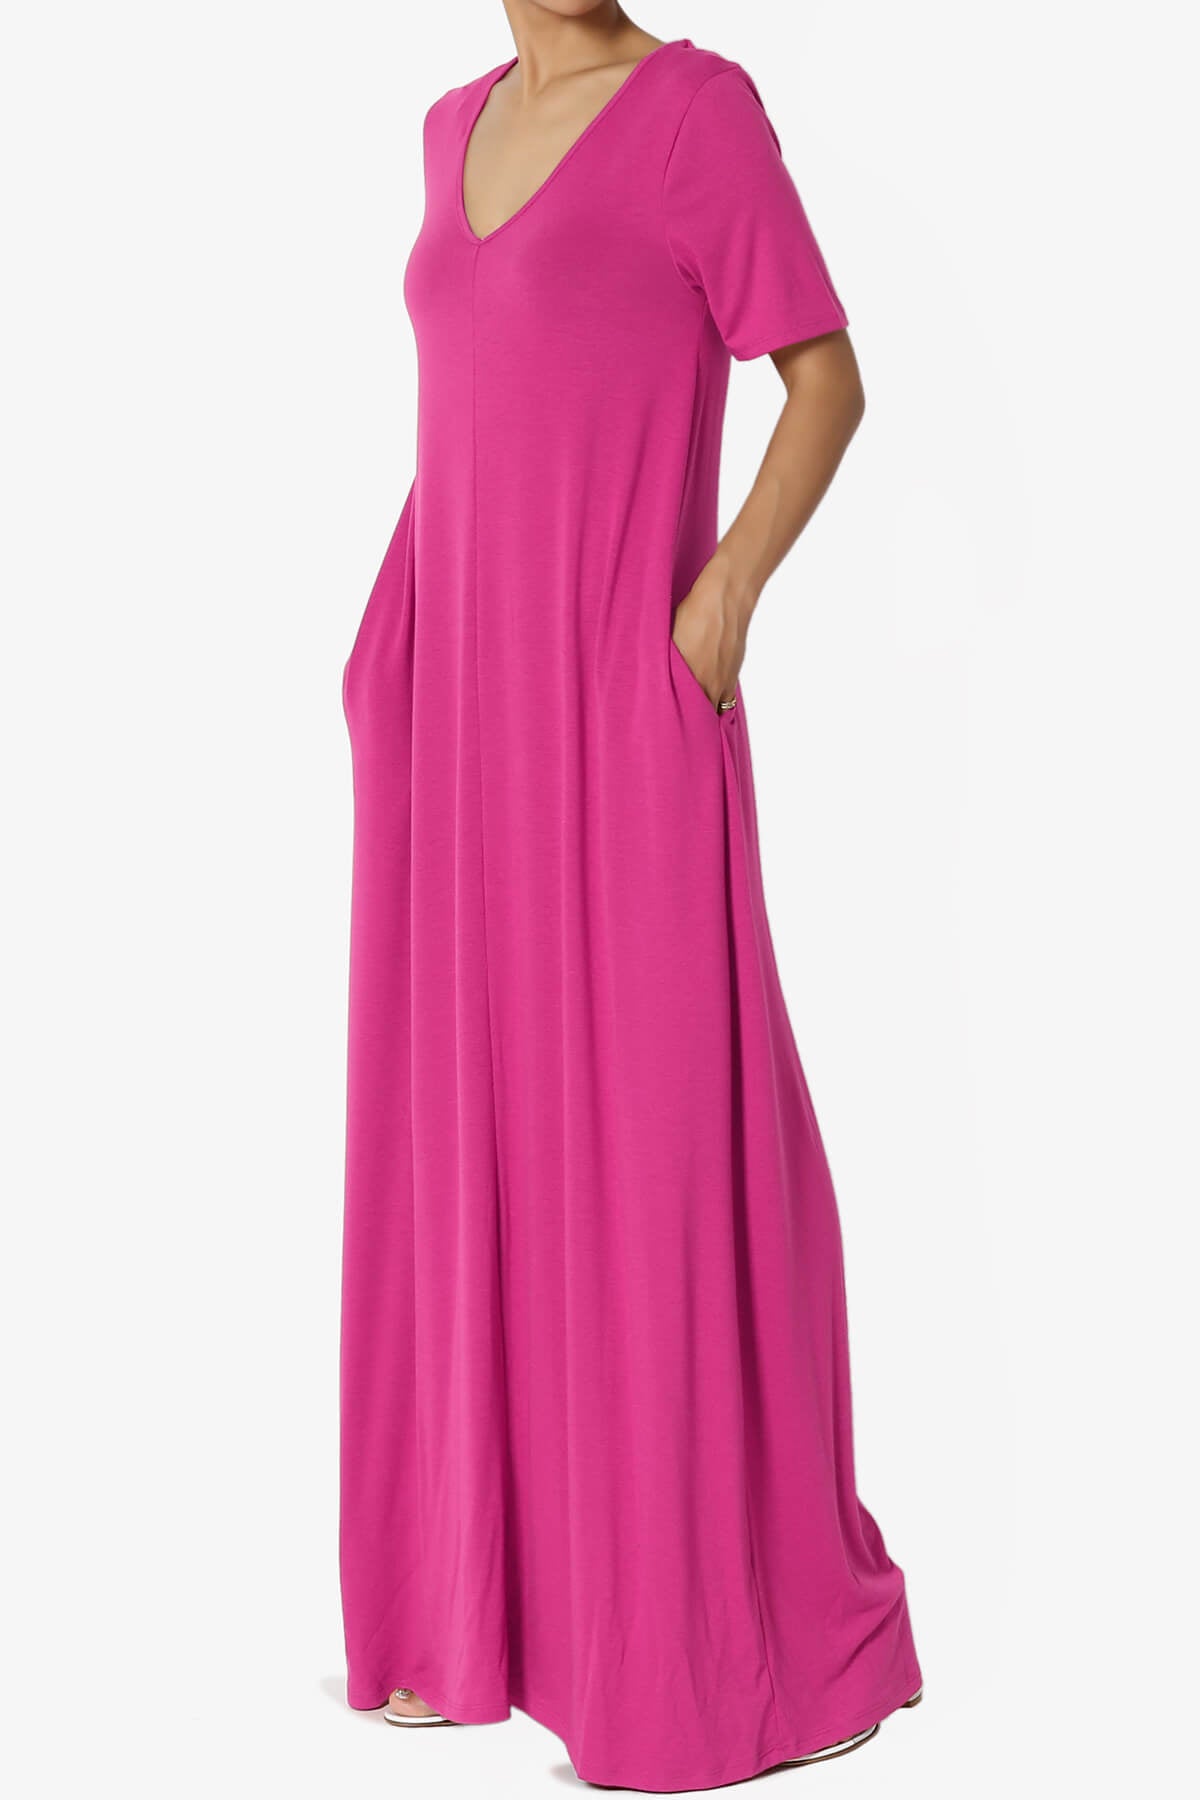 Load image into Gallery viewer, Vina Pocket Oversized Maxi Dress HOT PINK_3
